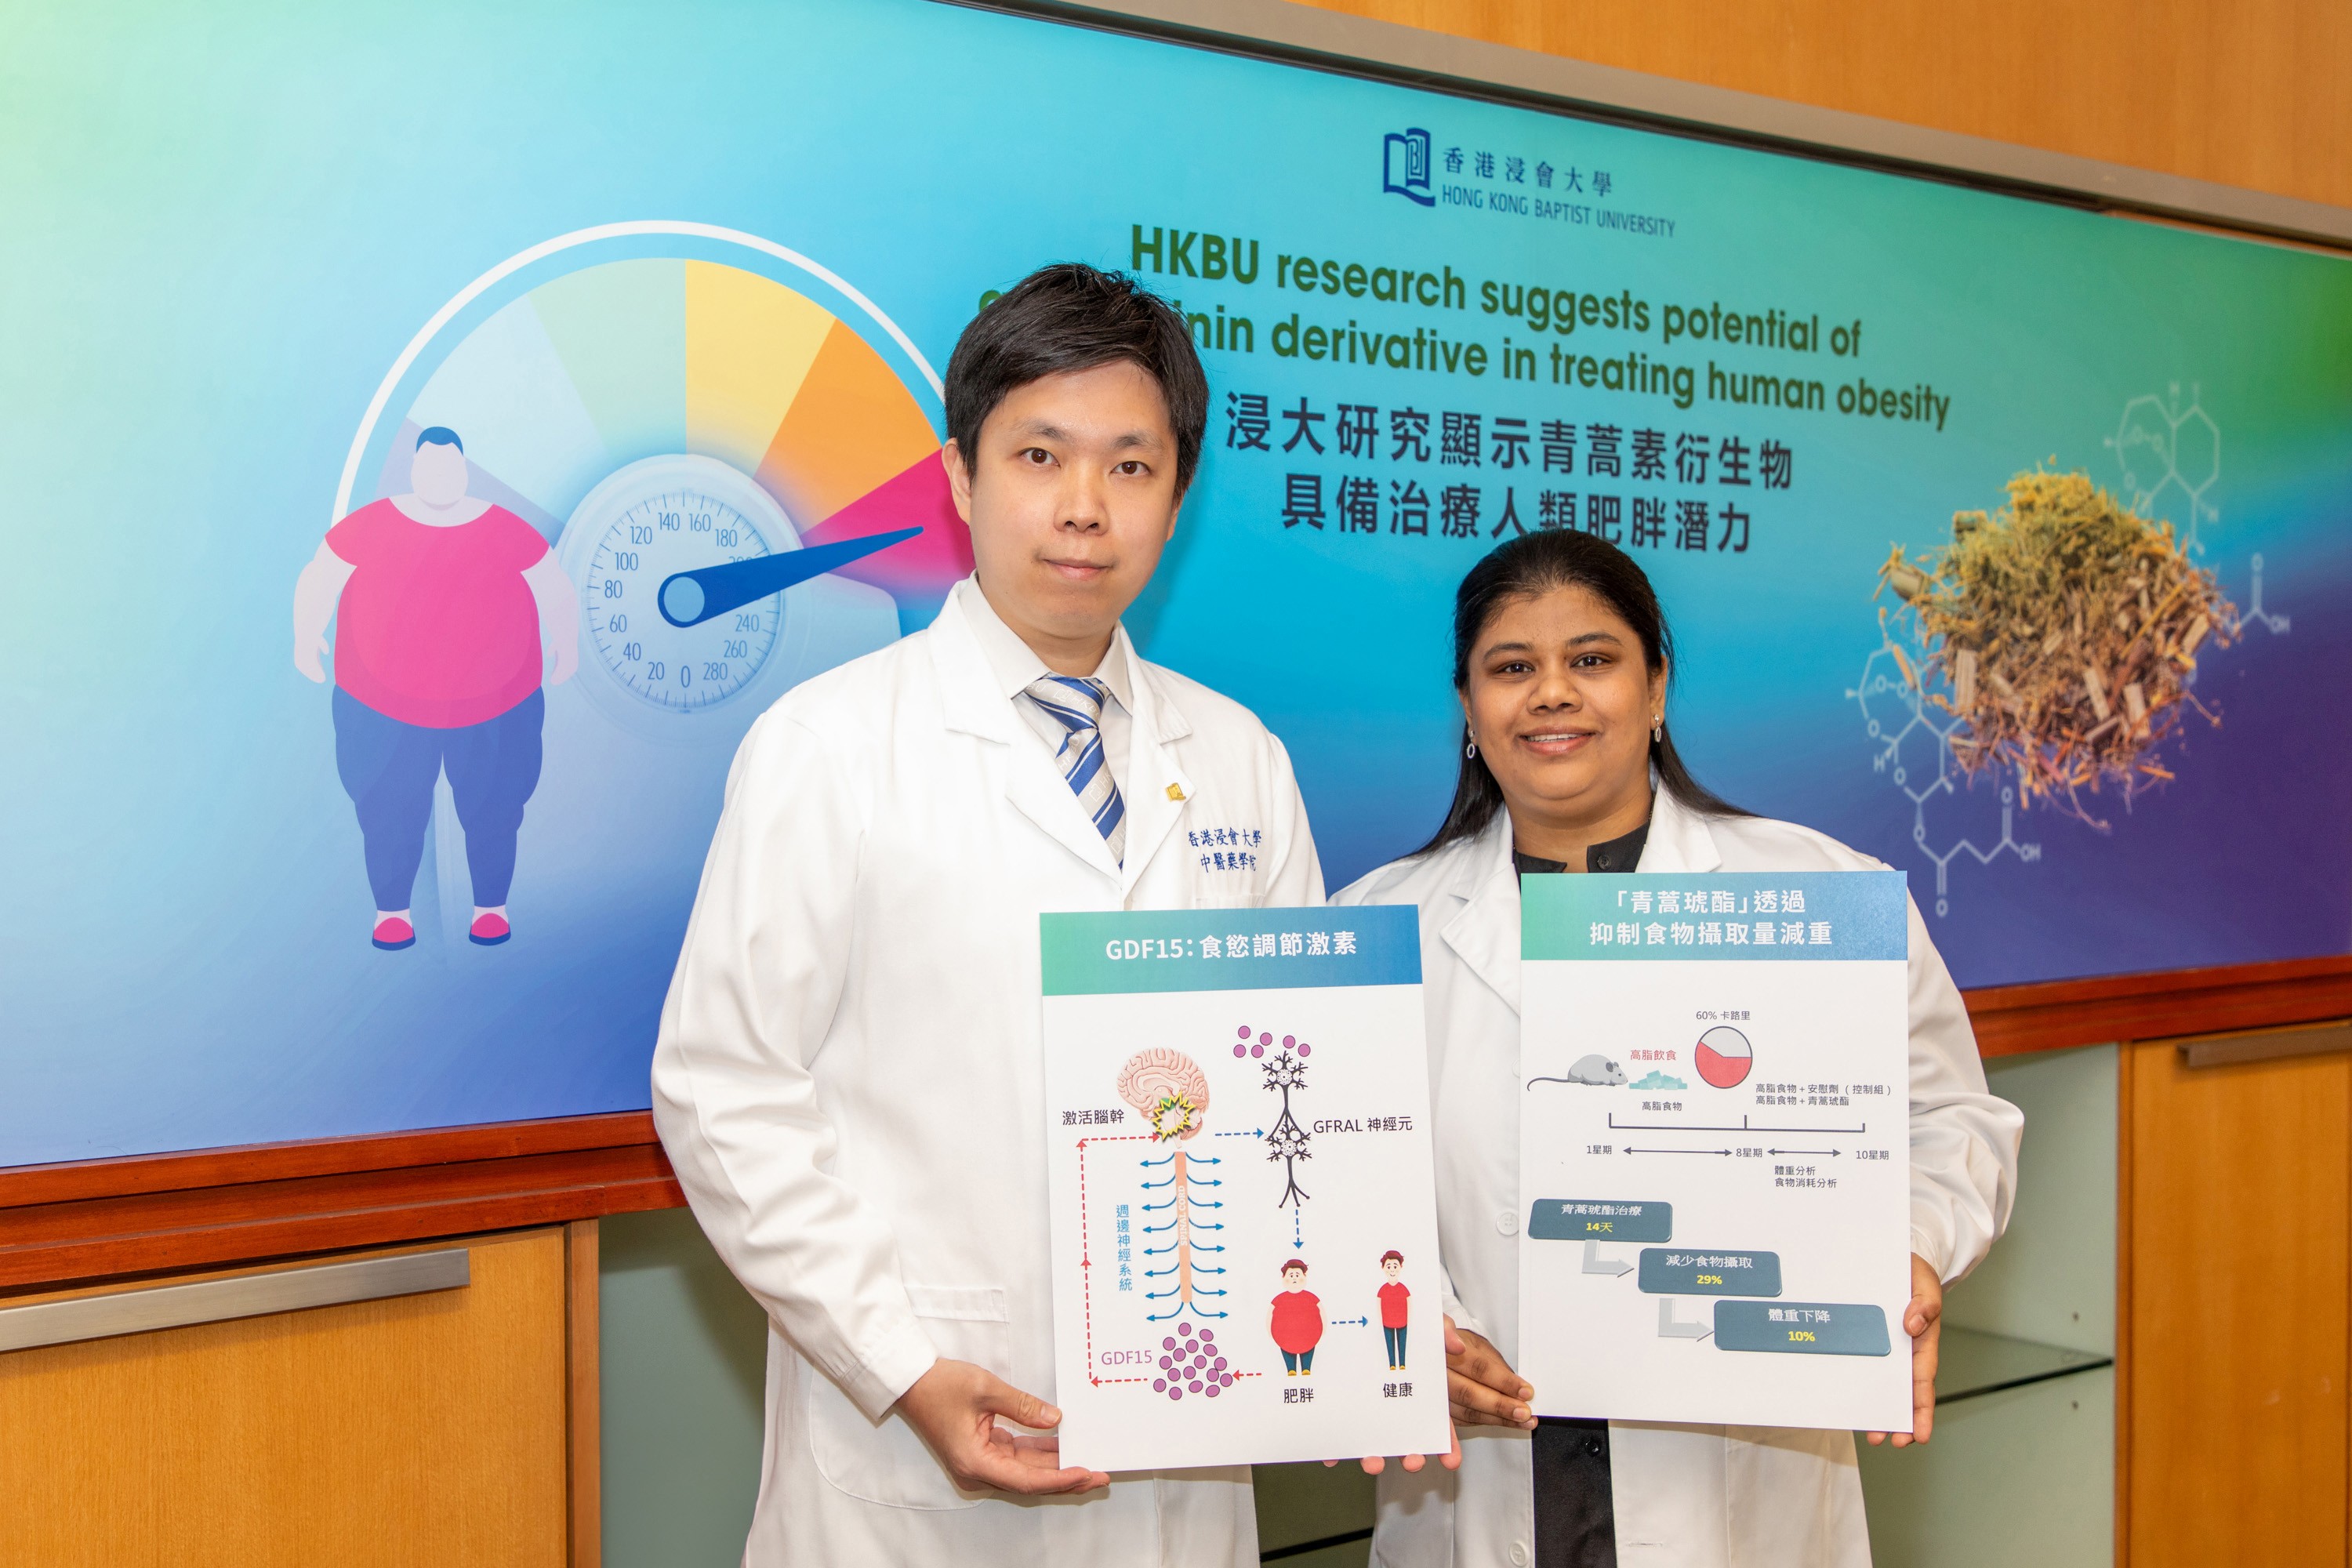 SCM’s research unleashes potential of artemisinin derivative in treating human obesity